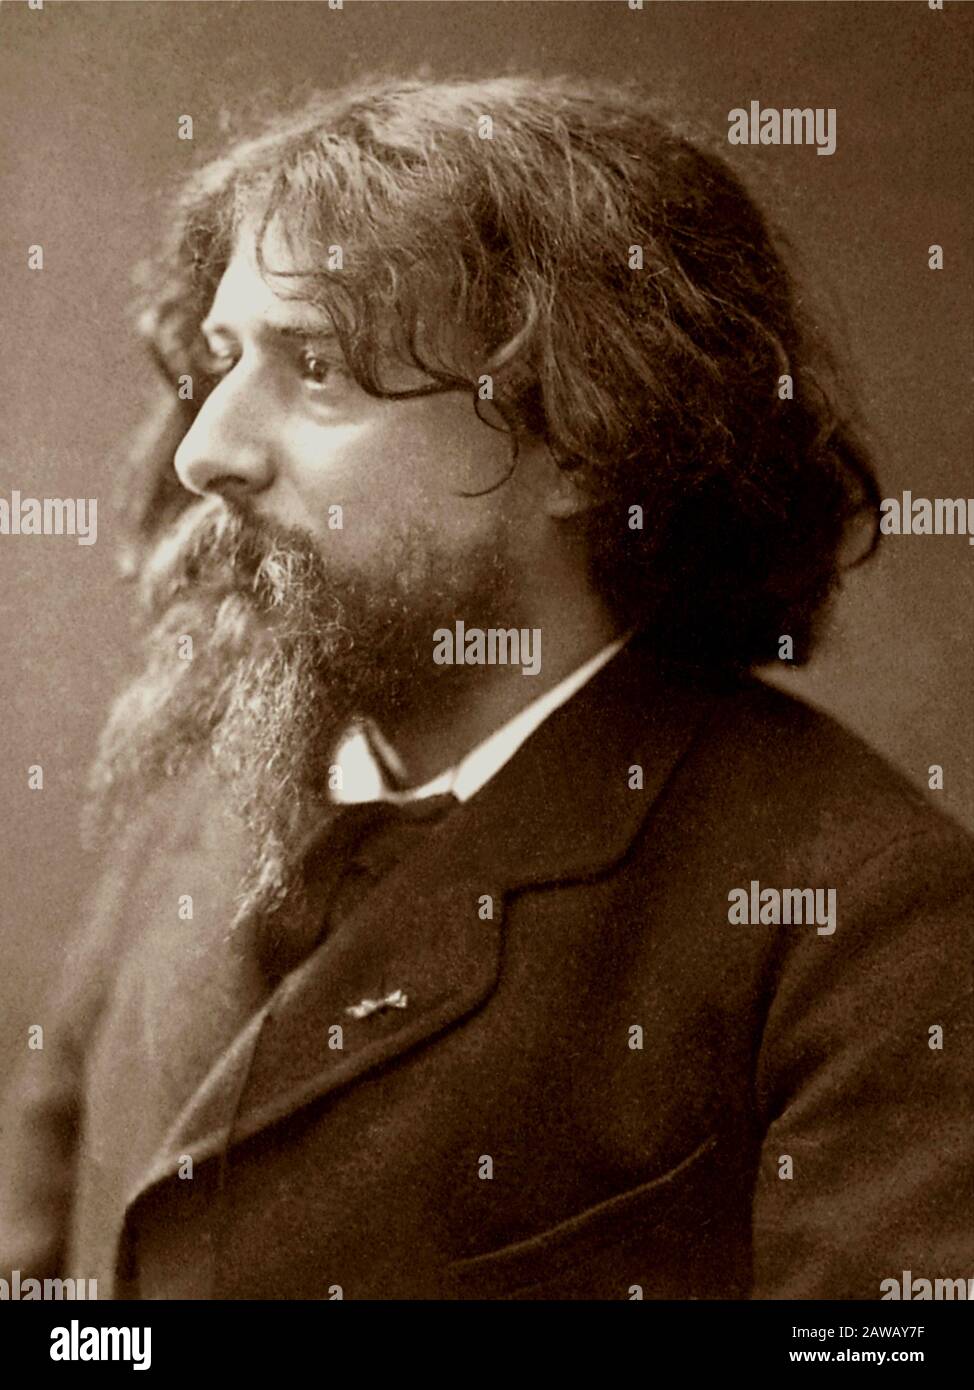 The french writer ALPHONSE DAUDET ( 1840 - 1897 ) , author of L'ARLESIENNE ( 1872 , later in music by Bizet and Cilea ) and TARTARINE DE TARASCONE ( 1 Stock Photo